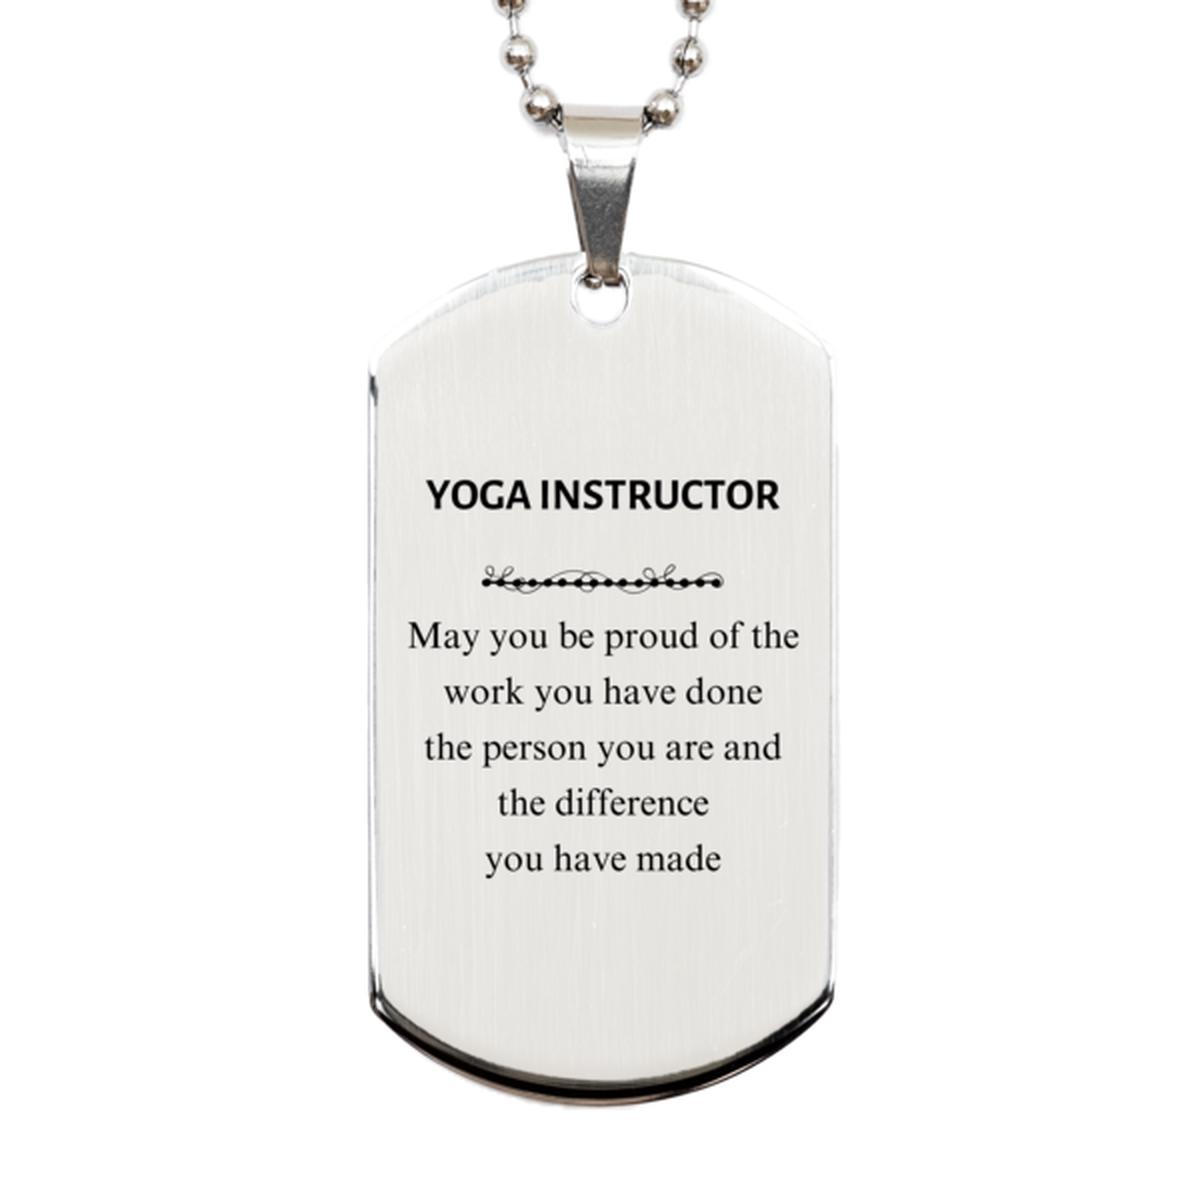 Yoga Instructor May you be proud of the work you have done, Retirement Yoga Instructor Silver Dog Tag for Colleague Appreciation Gifts Amazing for Yoga Instructor